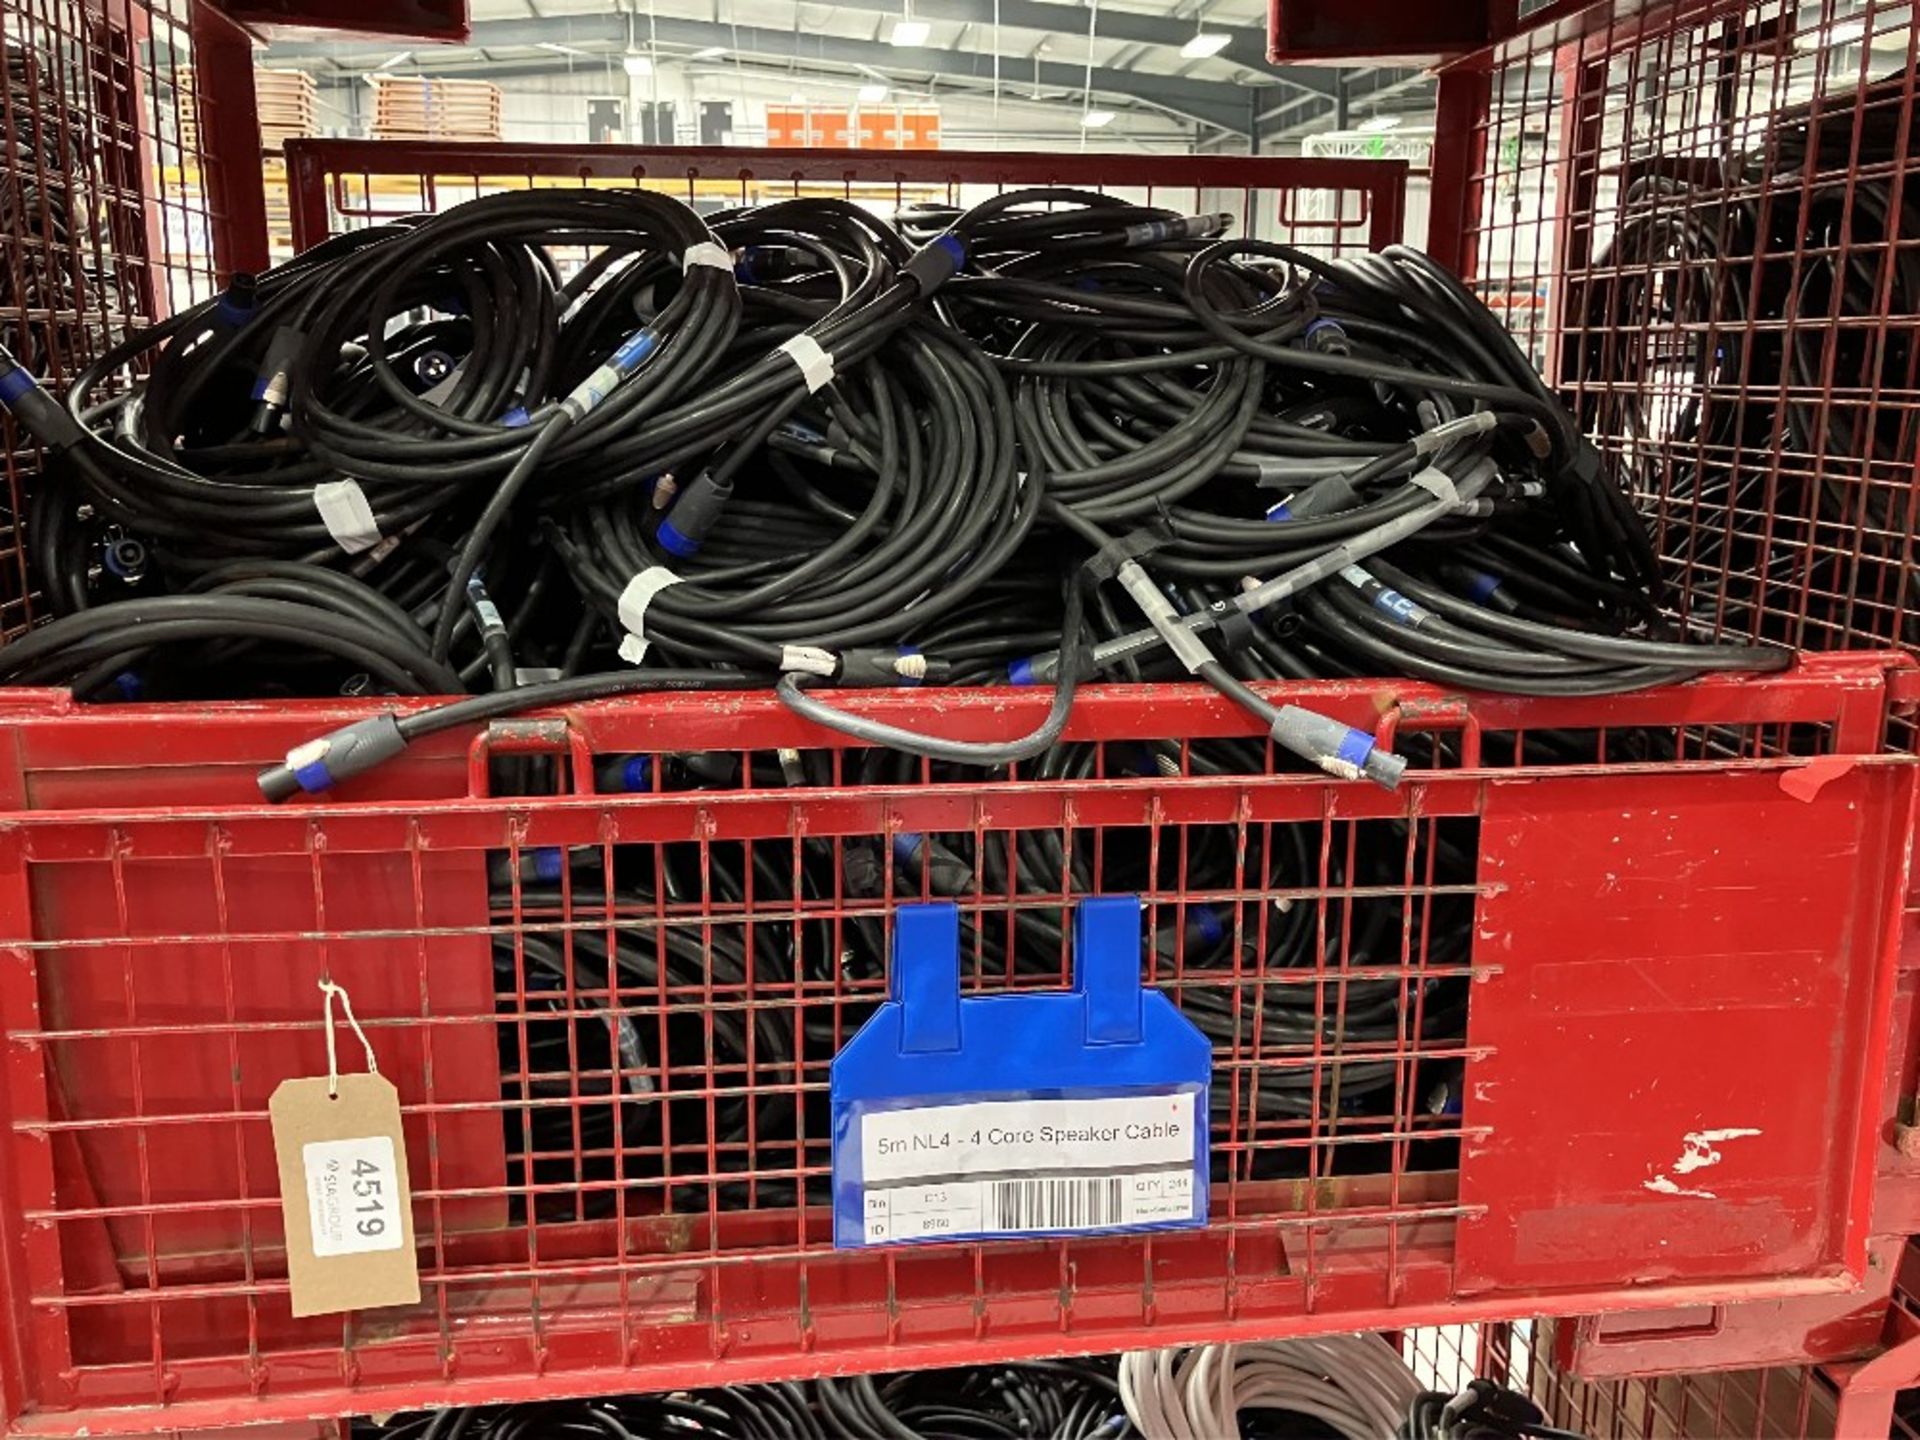 Large Quantity of 5m NL4-4 Core Speaker Cable with Steel Fabricated Stillage